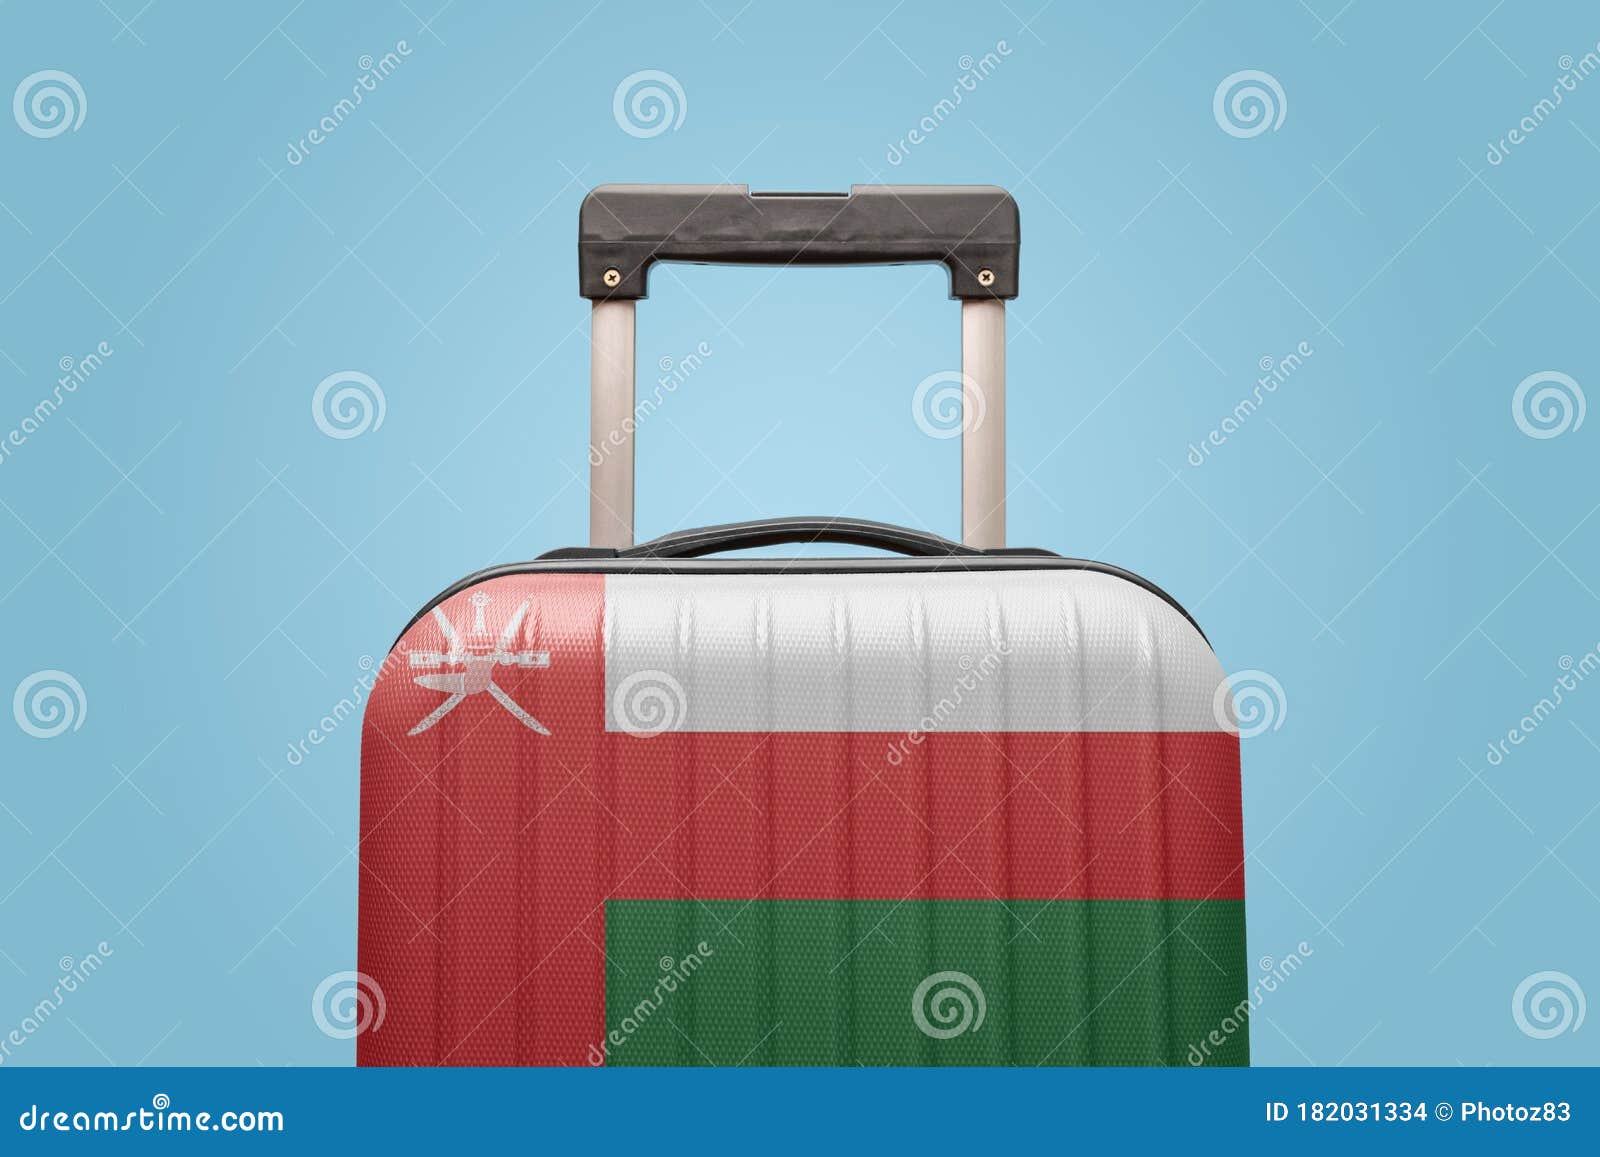 travel bags in oman